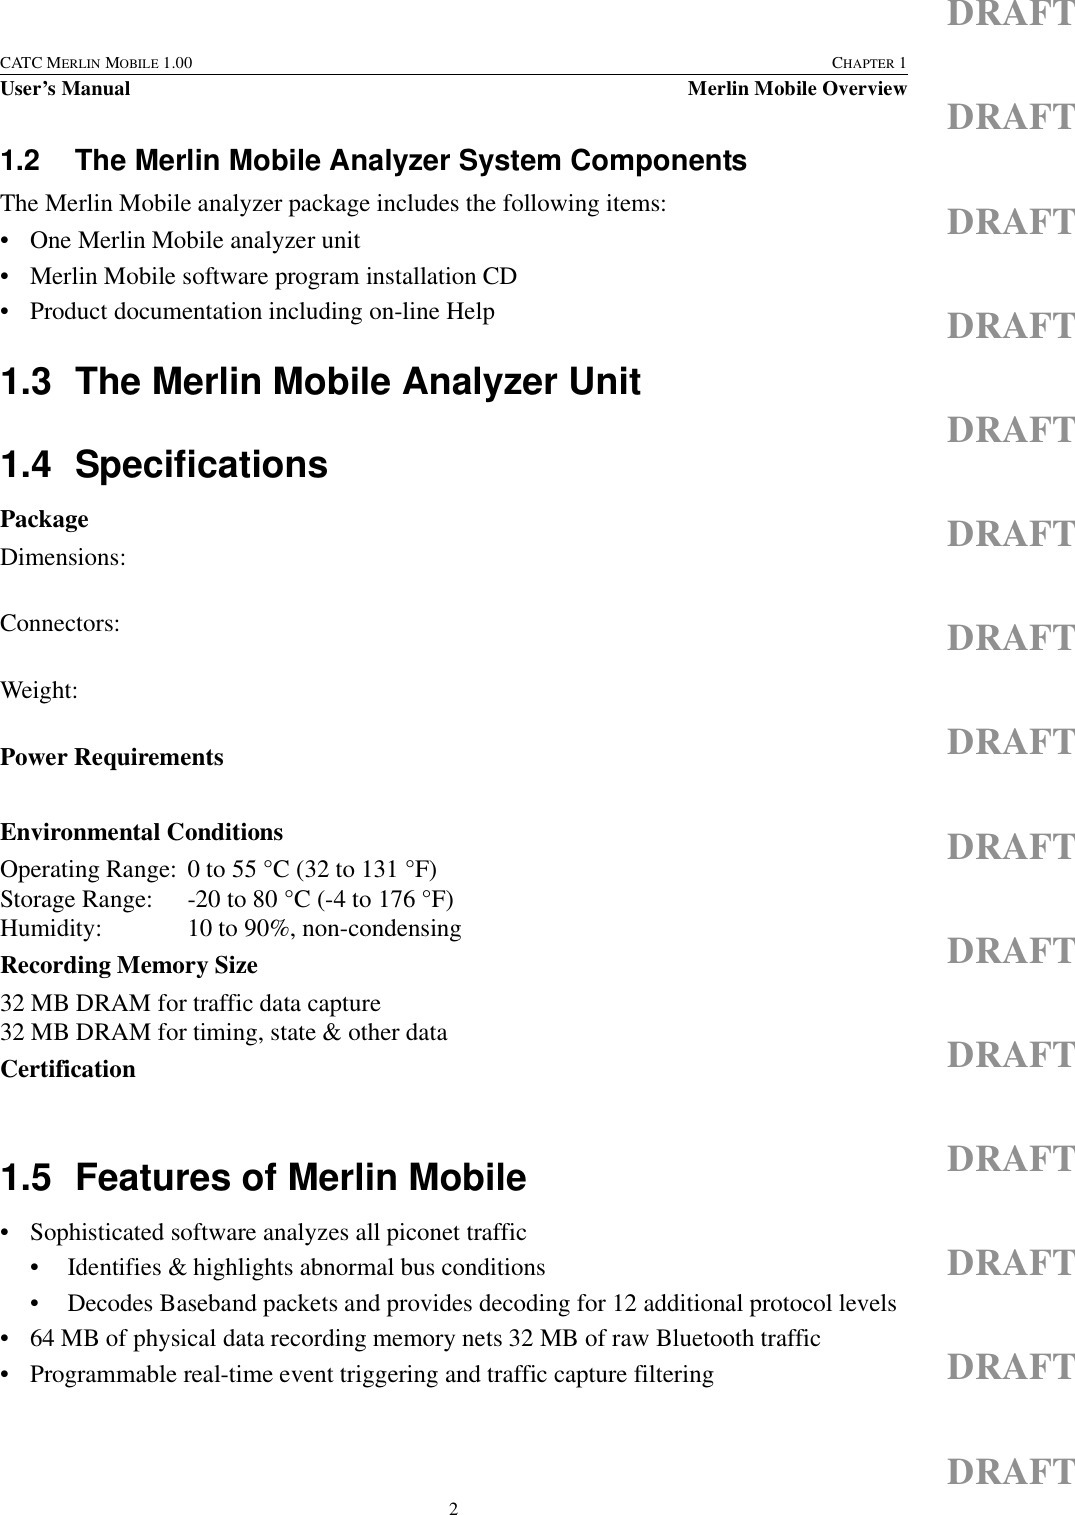 2CATC MERLIN MOBILE 1.00 CHAPTER 1User’s Manual Merlin Mobile OverviewDRAFTDRAFTDRAFTDRAFTDRAFTDRAFTDRAFTDRAFTDRAFTDRAFTDRAFTDRAFTDRAFTDRAFTDRAFT1.2 The Merlin Mobile Analyzer System ComponentsThe Merlin Mobile analyzer package includes the following items:• One Merlin Mobile analyzer unit• Merlin Mobile software program installation CD• Product documentation including on-line Help1.3 The Merlin Mobile Analyzer Unit1.4 SpecificationsPackageDimensions:Connectors:Weight:Power RequirementsEnvironmental ConditionsOperating Range: 0 to 55 °C (32 to 131 °F)Storage Range: -20 to 80 °C (-4 to 176 °F)Humidity: 10 to 90%, non-condensingRecording Memory Size32 MB DRAM for traffic data capture32 MB DRAM for timing, state &amp; other dataCertification1.5 Features of Merlin Mobile• Sophisticated software analyzes all piconet traffic• Identifies &amp; highlights abnormal bus conditions• Decodes Baseband packets and provides decoding for 12 additional protocol levels• 64 MB of physical data recording memory nets 32 MB of raw Bluetooth traffic• Programmable real-time event triggering and traffic capture filtering